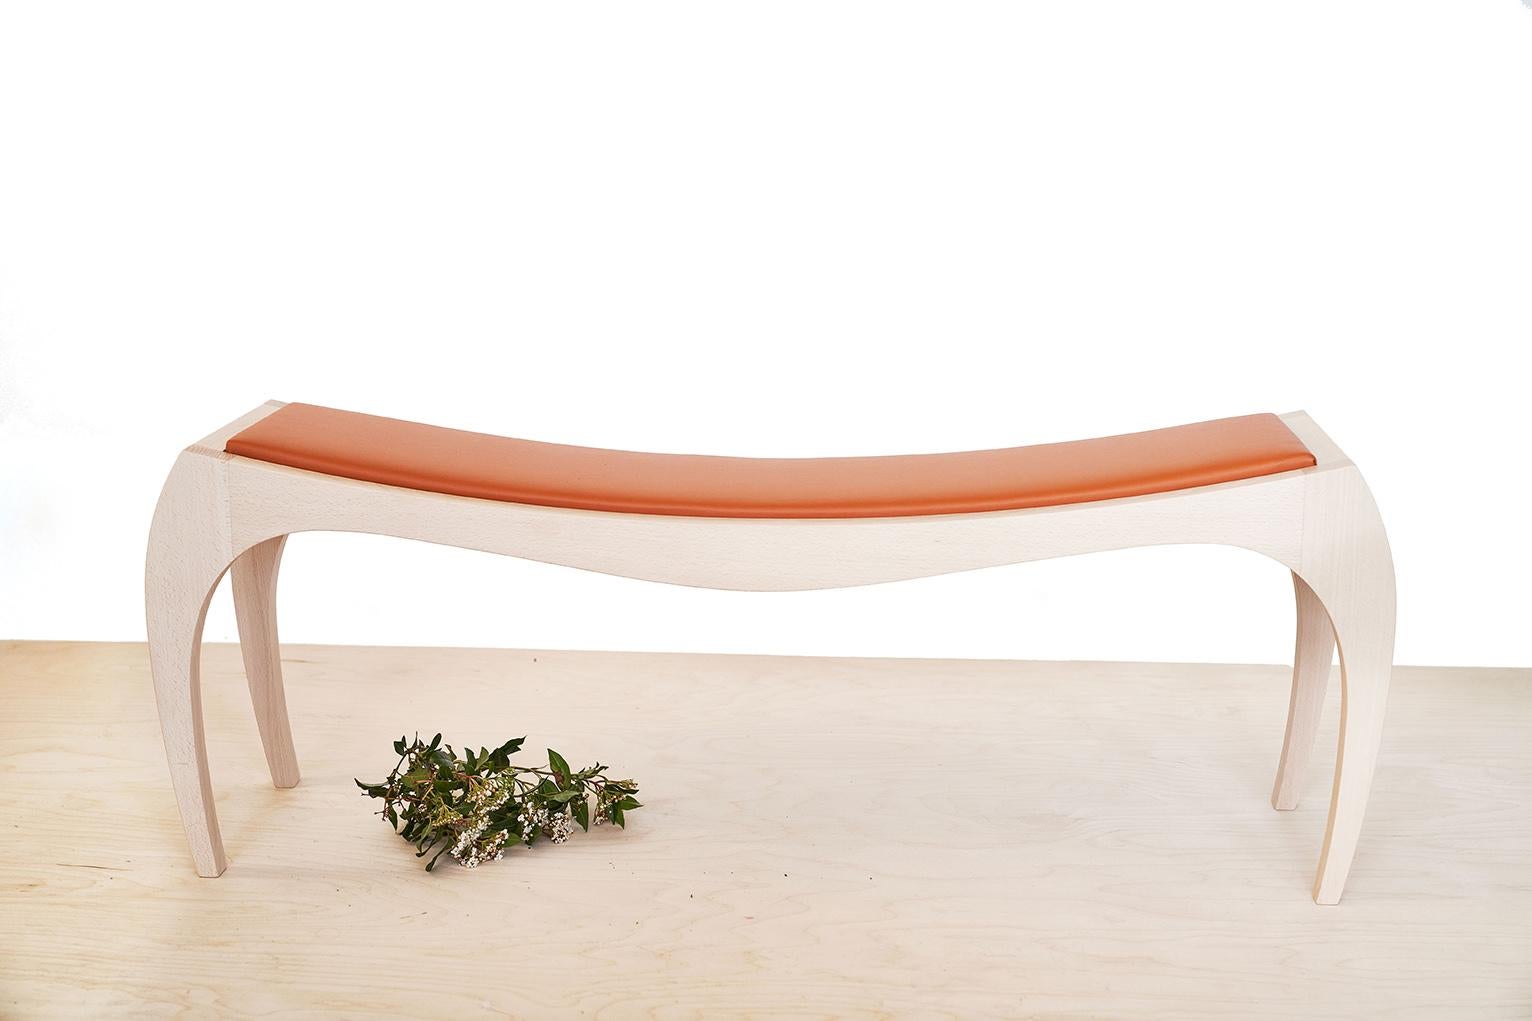 Skay Rumbo bench by Jean-Baptiste Van den Heede
Dimensions: L 118 x D 31 x H 42 cm
Materials: white beech, textile.
Also available: other textiles available.

The upholstered Rumbo version proposes a stool with quality fabrics to your liking.